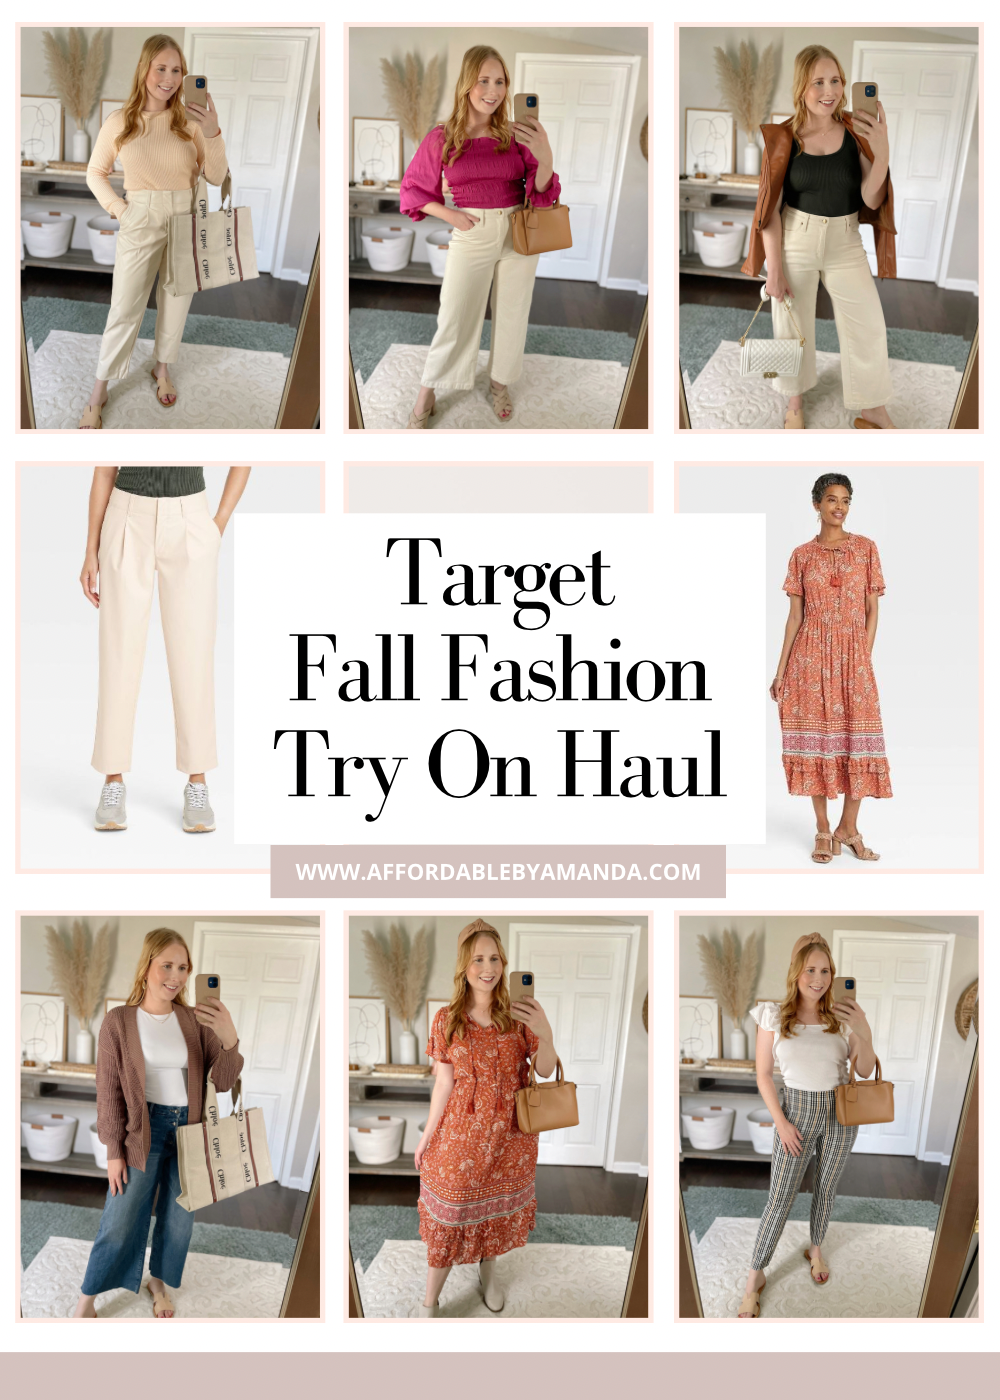 🎯 SO MANY NEW FINDS‼️TARGET WOMEN'S CLOTHING, TARGET SHOP WITH ME, TARGET  CLOTHING HAUL